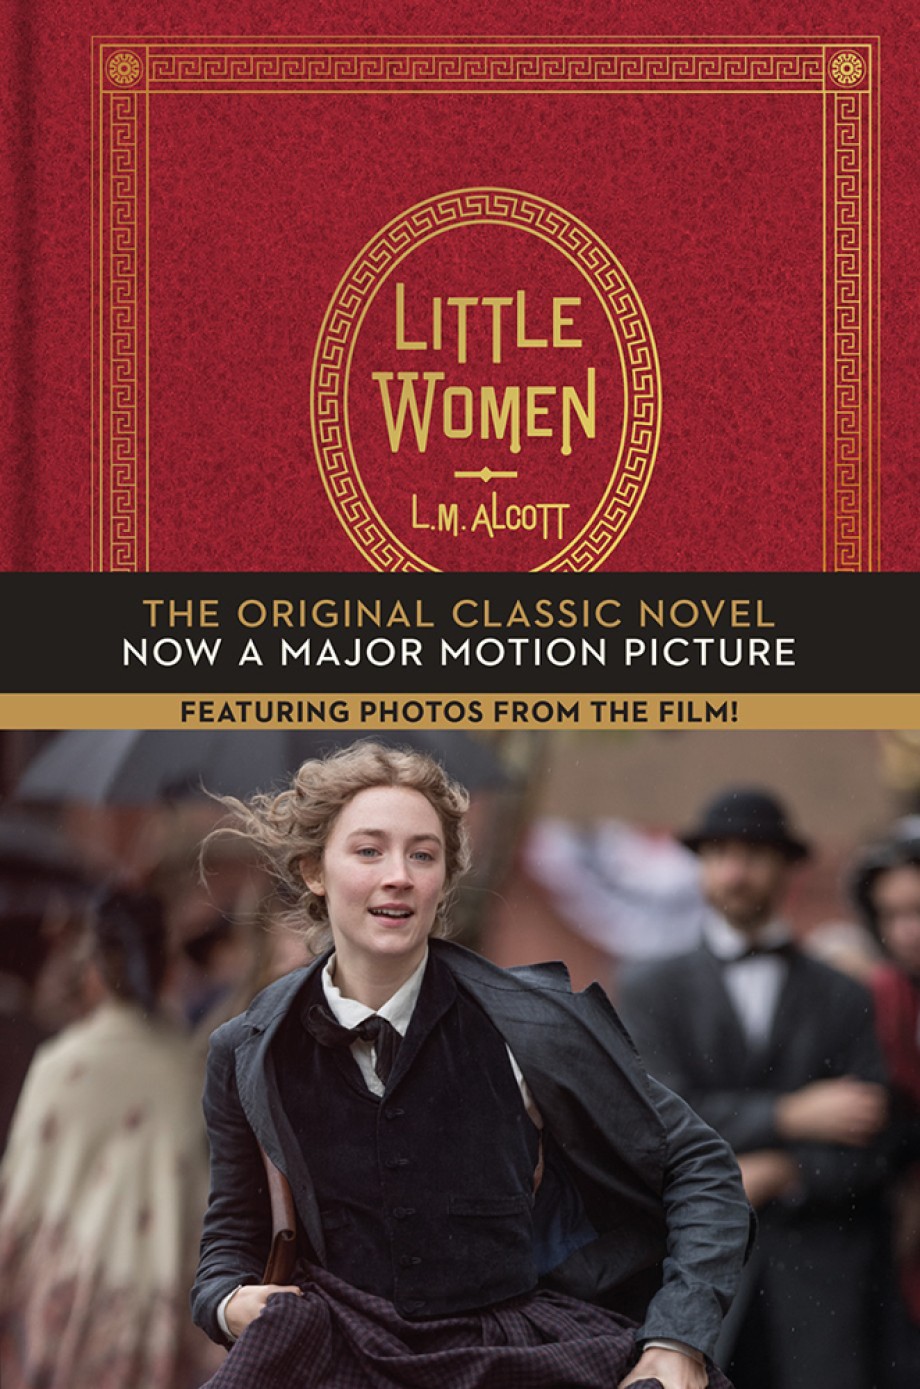 Little Women The Original Classic Novel Featuring Photos from the Film!